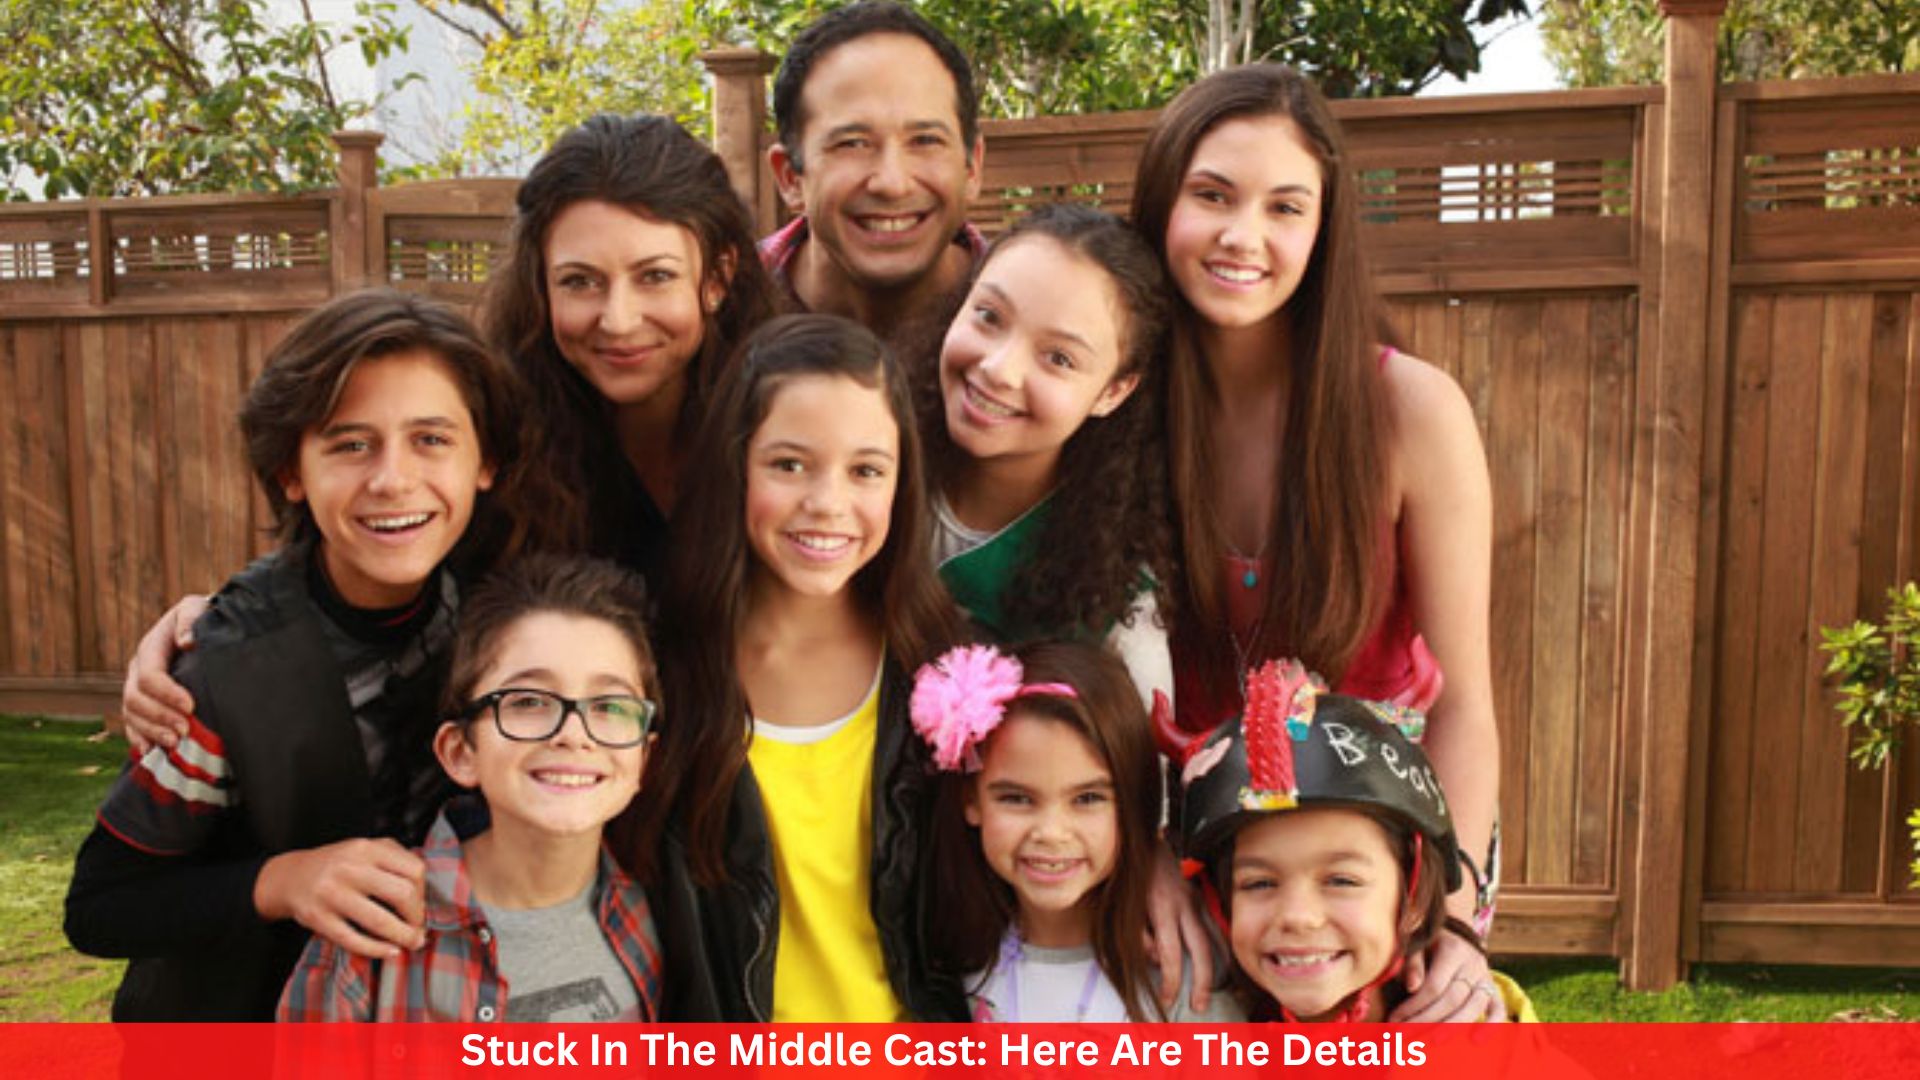 Stuck In The Middle Cast: Here Are The Details